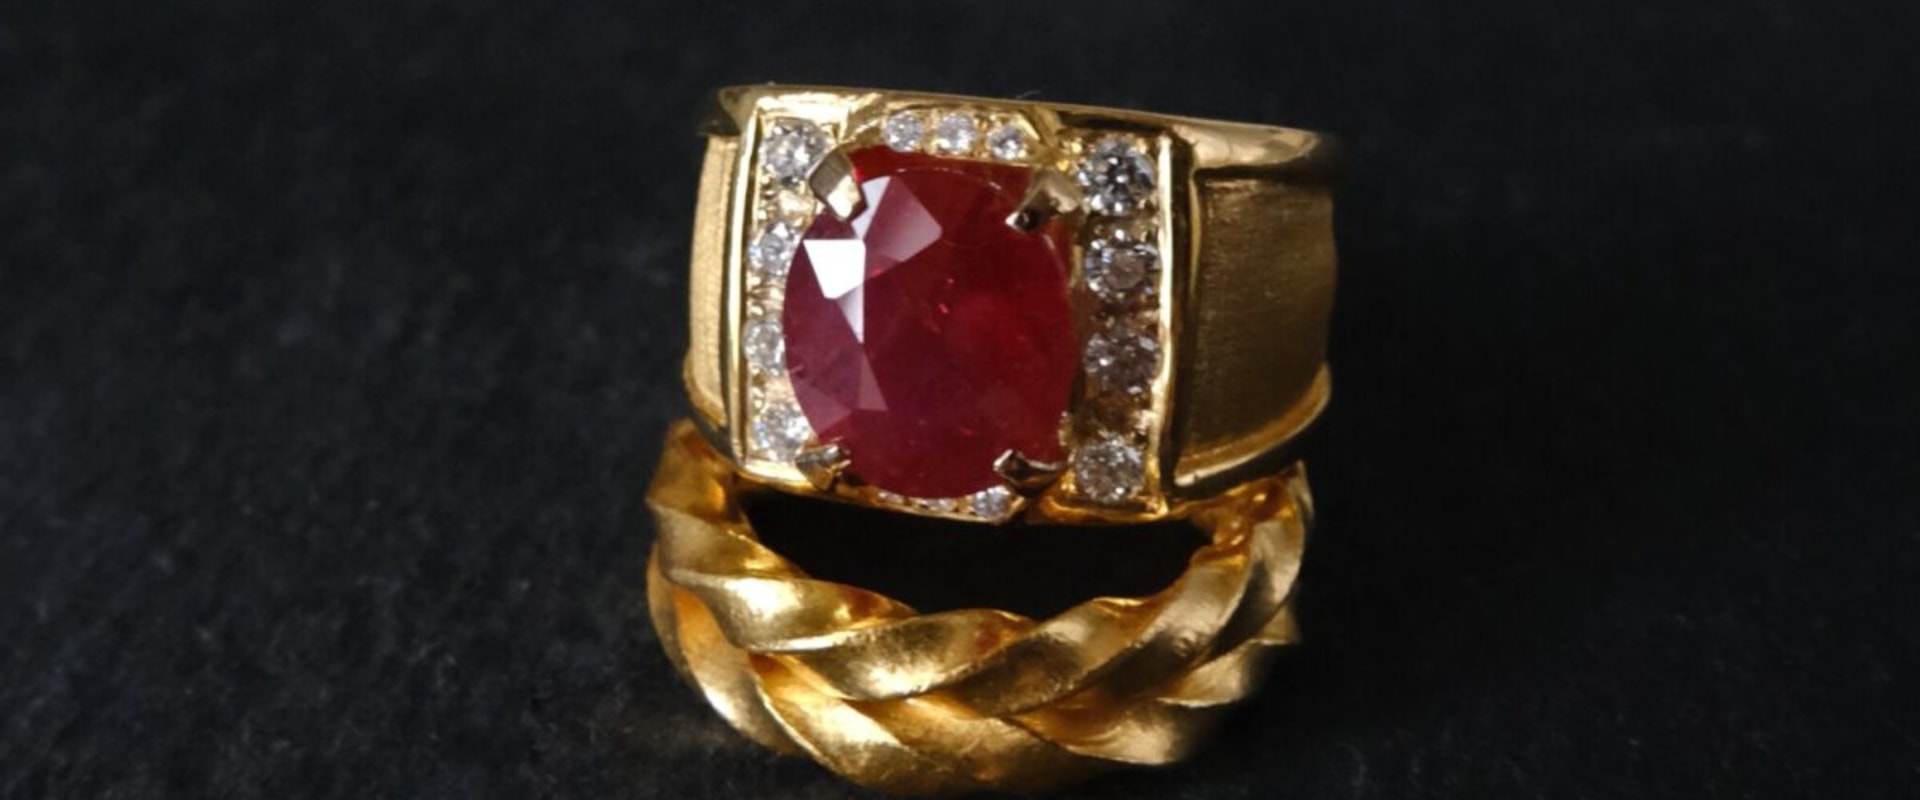 Rubies for Engagement Rings: A Comprehensive Overview